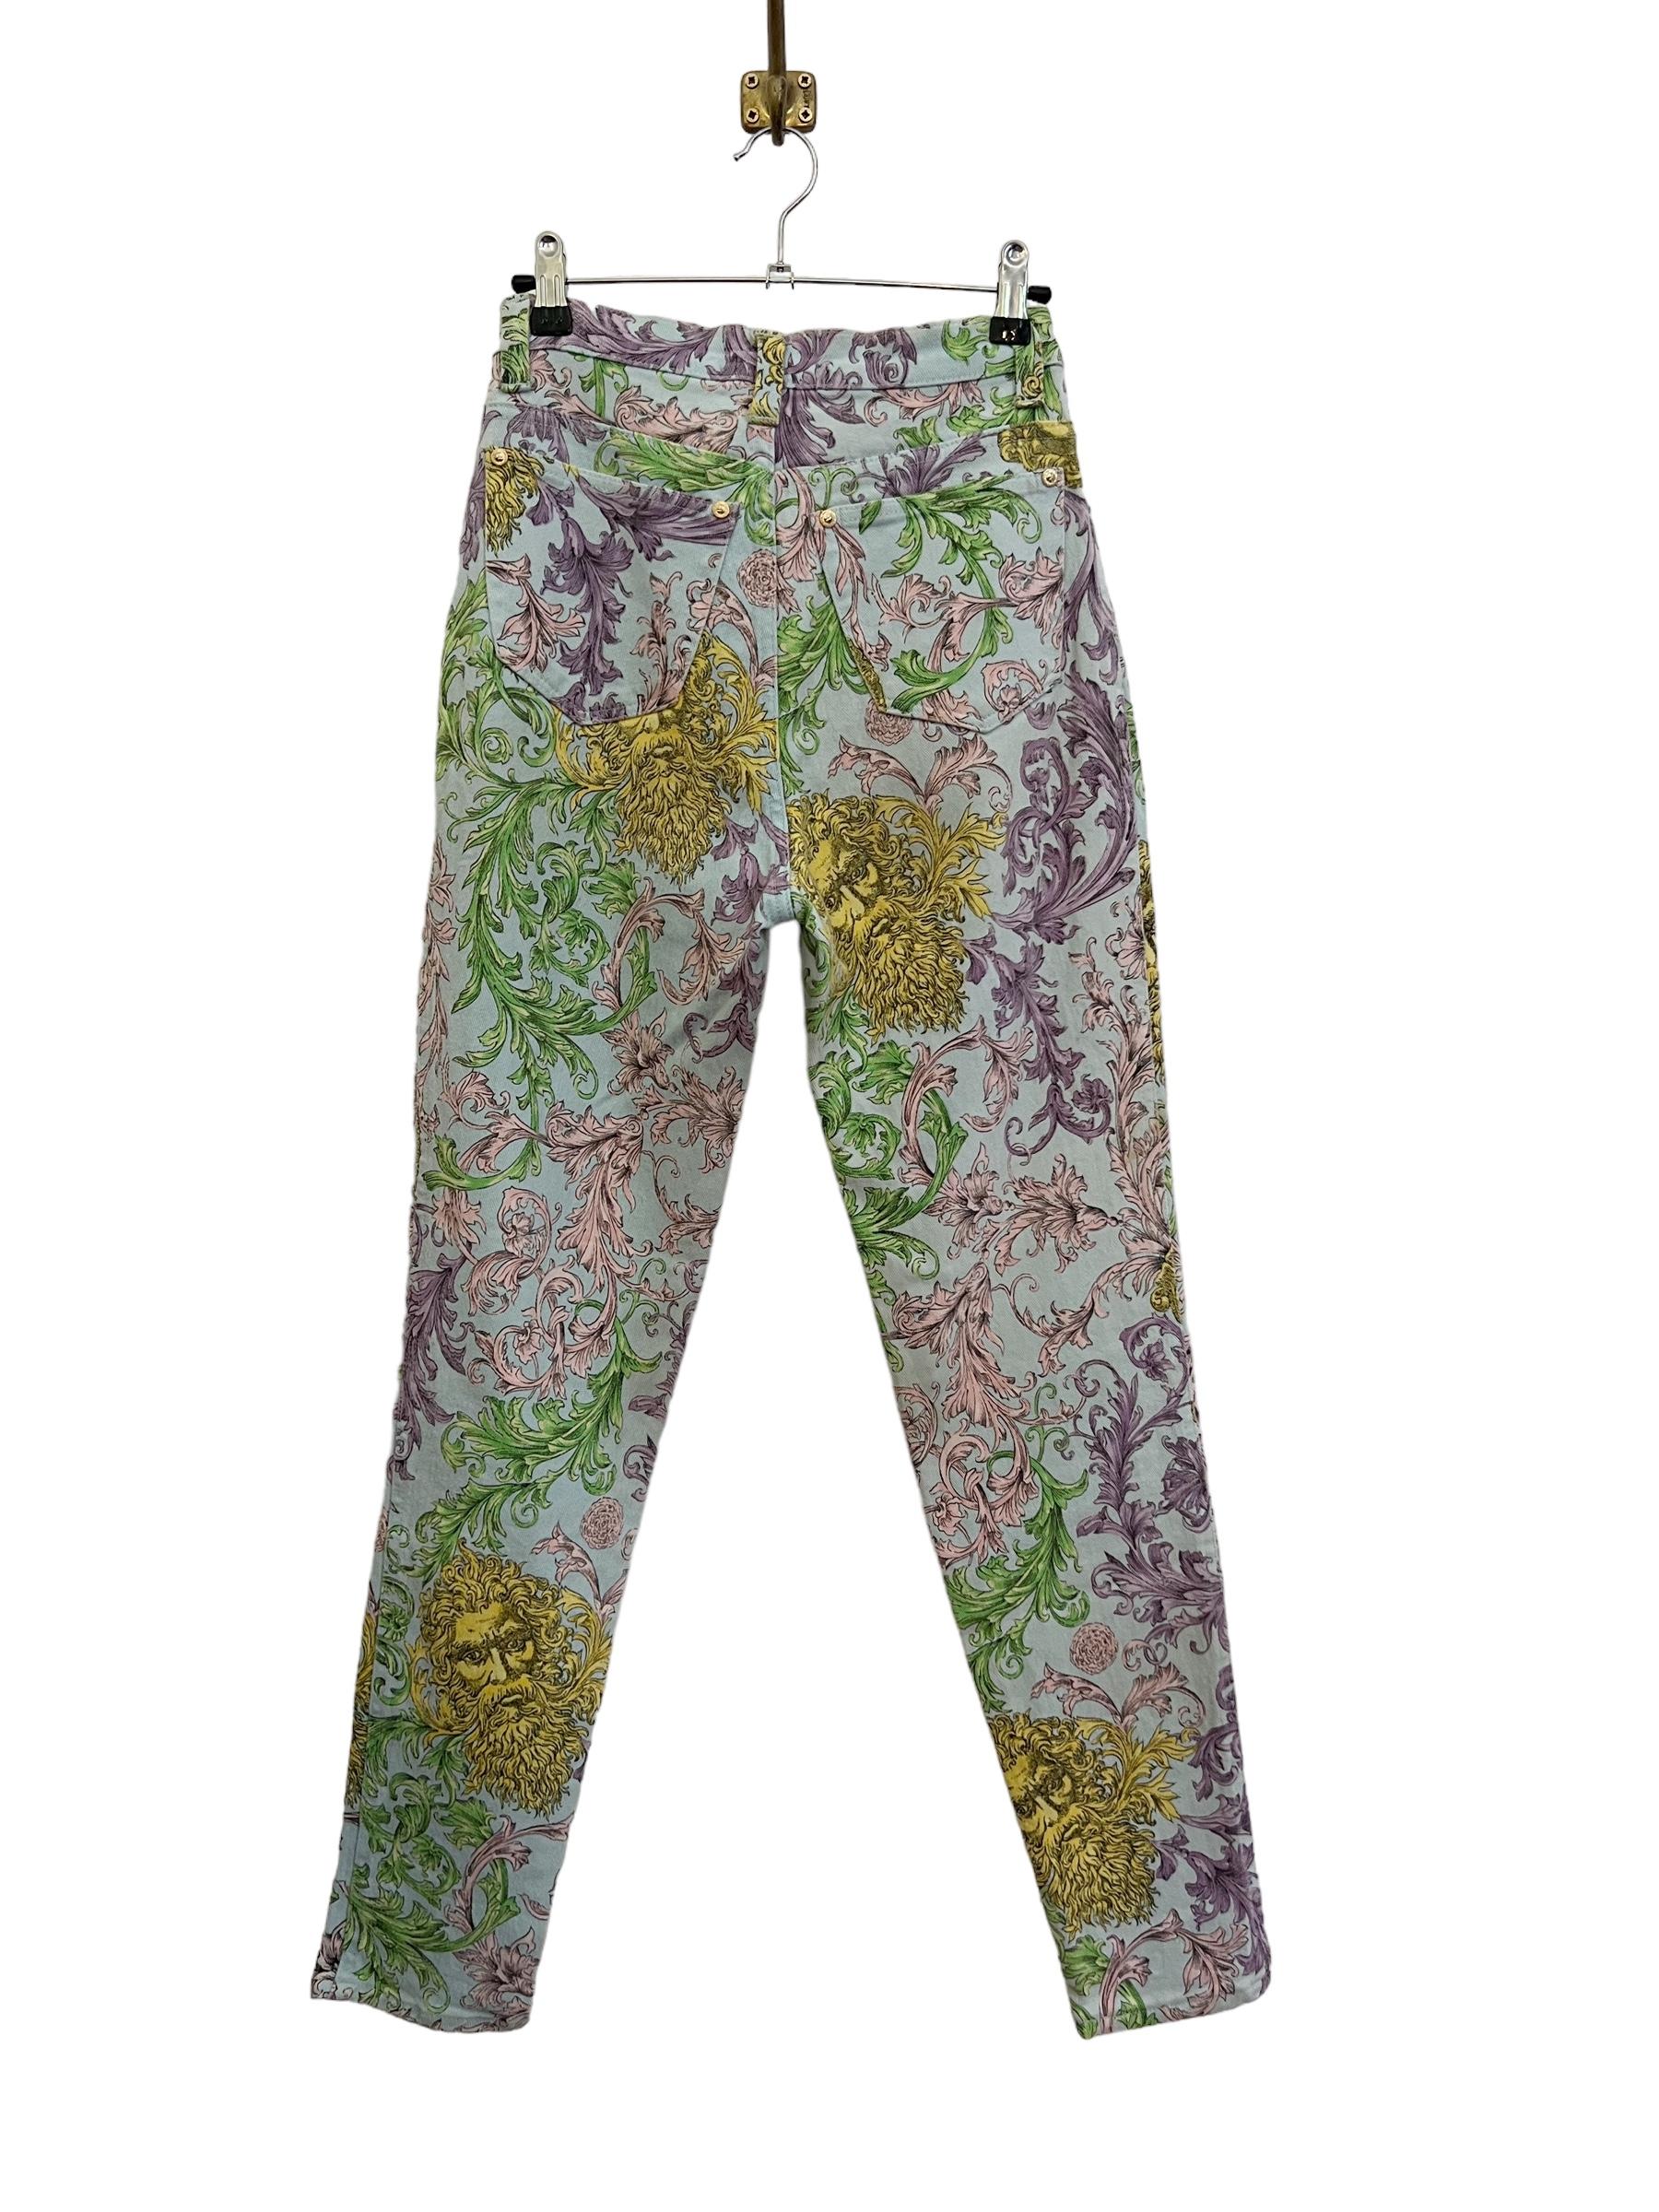 Pastel 1990's Vintage Gianni Versace Baroque Rococo High Waisted Jeans  For Sale 5